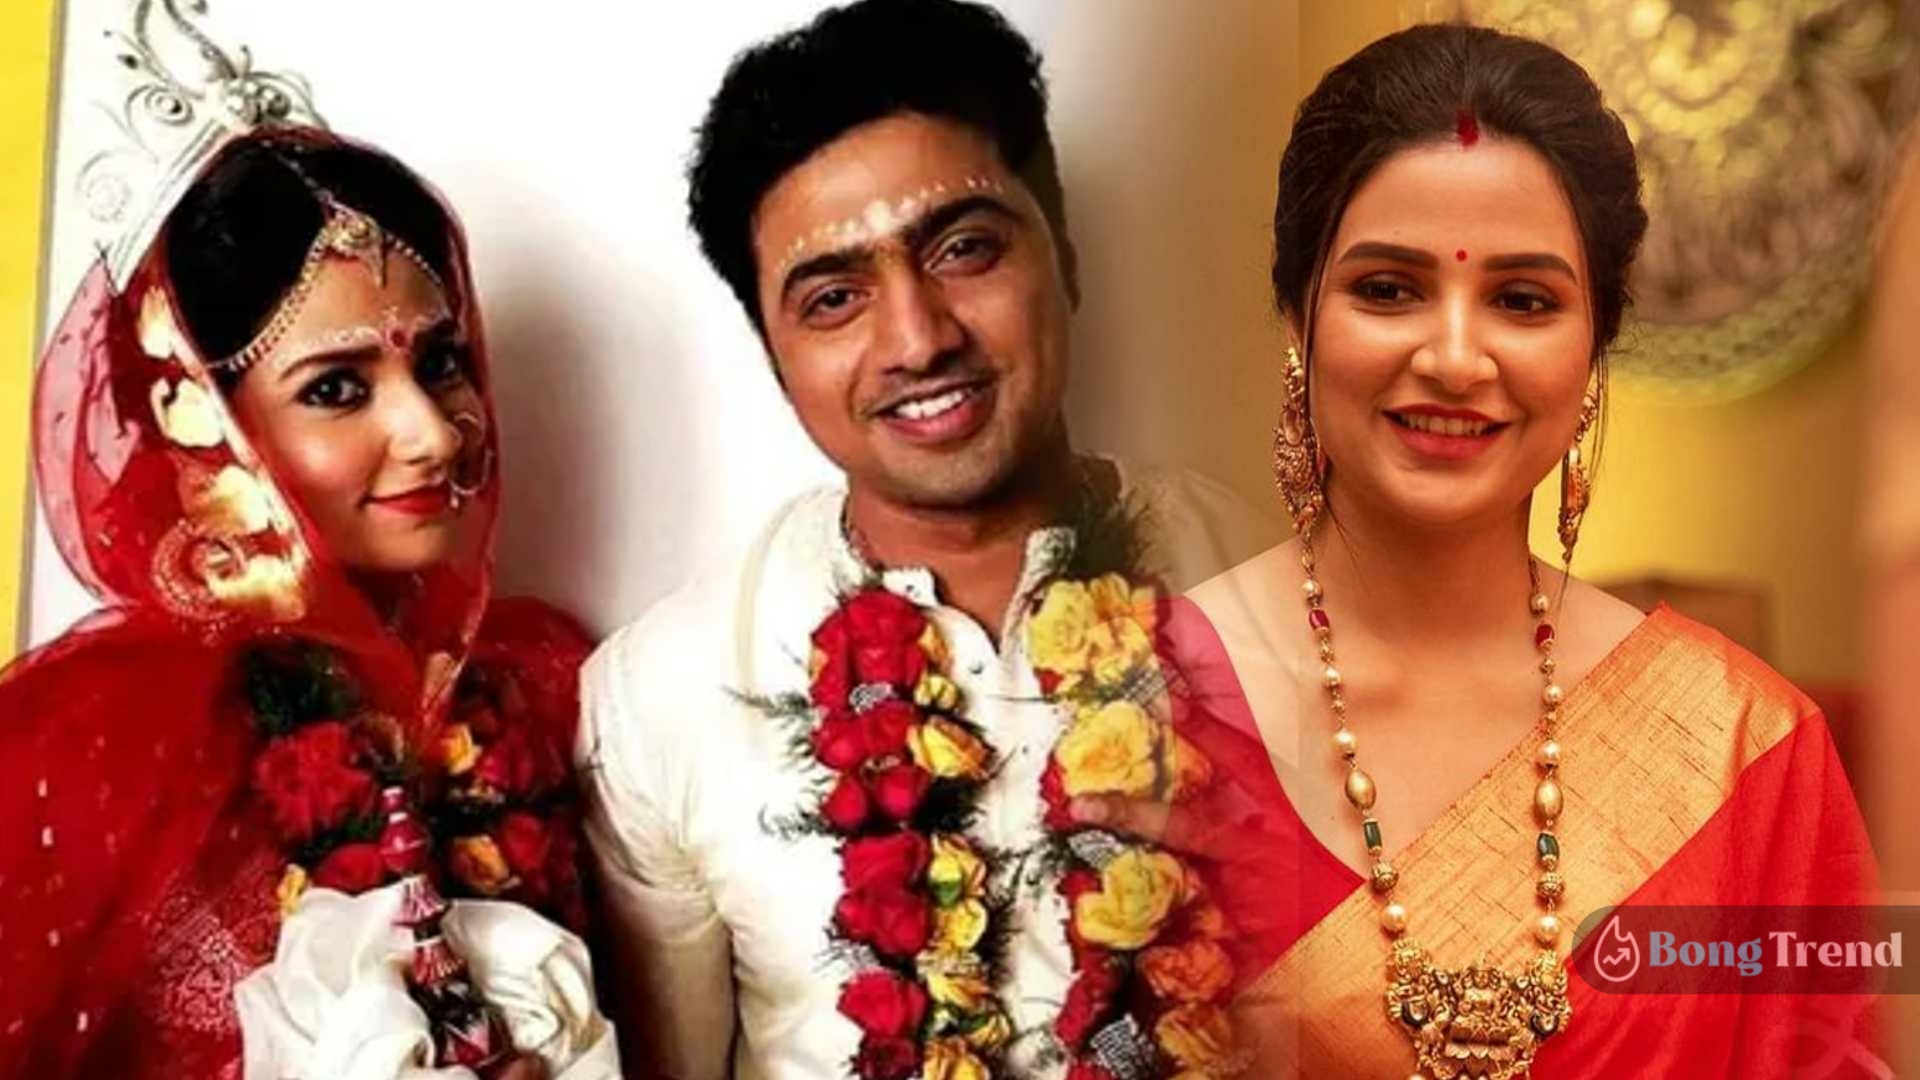 Subhashree ask Dev when he will get married